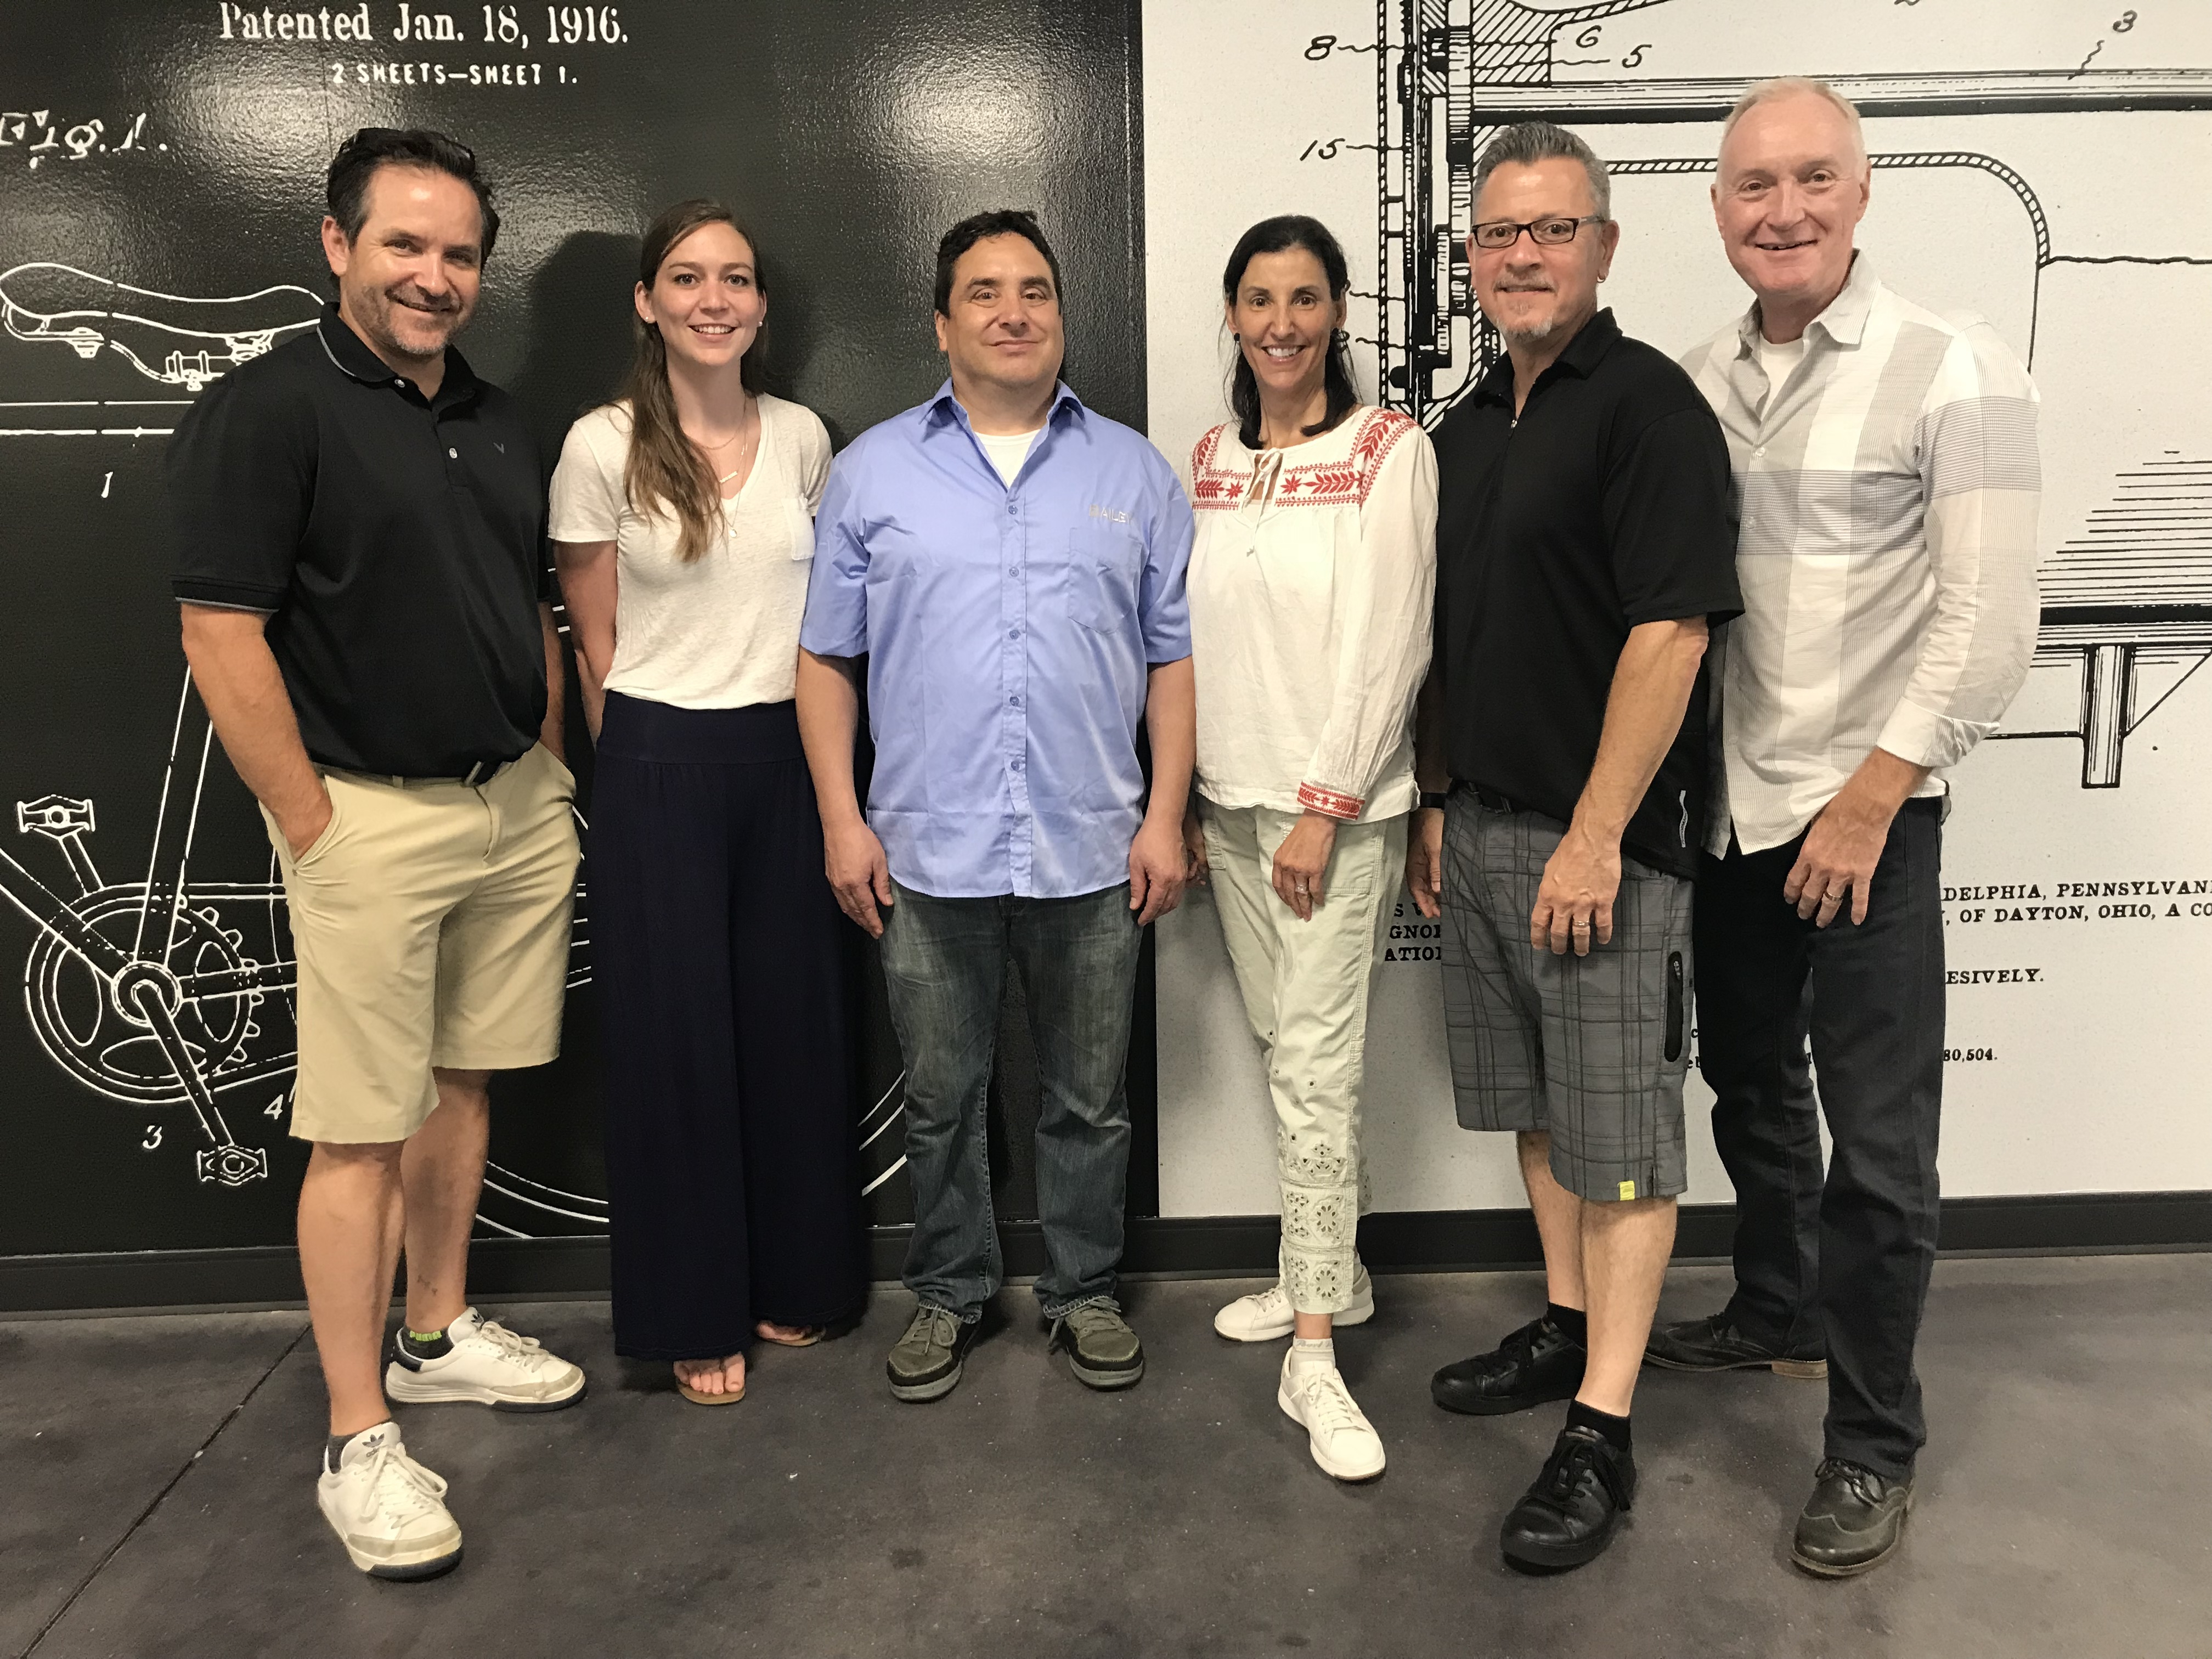 Huffy has hired 26 new employees in 2018 as it launches new brands, including the Batch Bicycles staff. Left to right: Bruno Maier, Kristina Borchert, Joe Atocha, Dorothy Pacheco, Chris Keller and Huffy president and CEO Bill Smith.